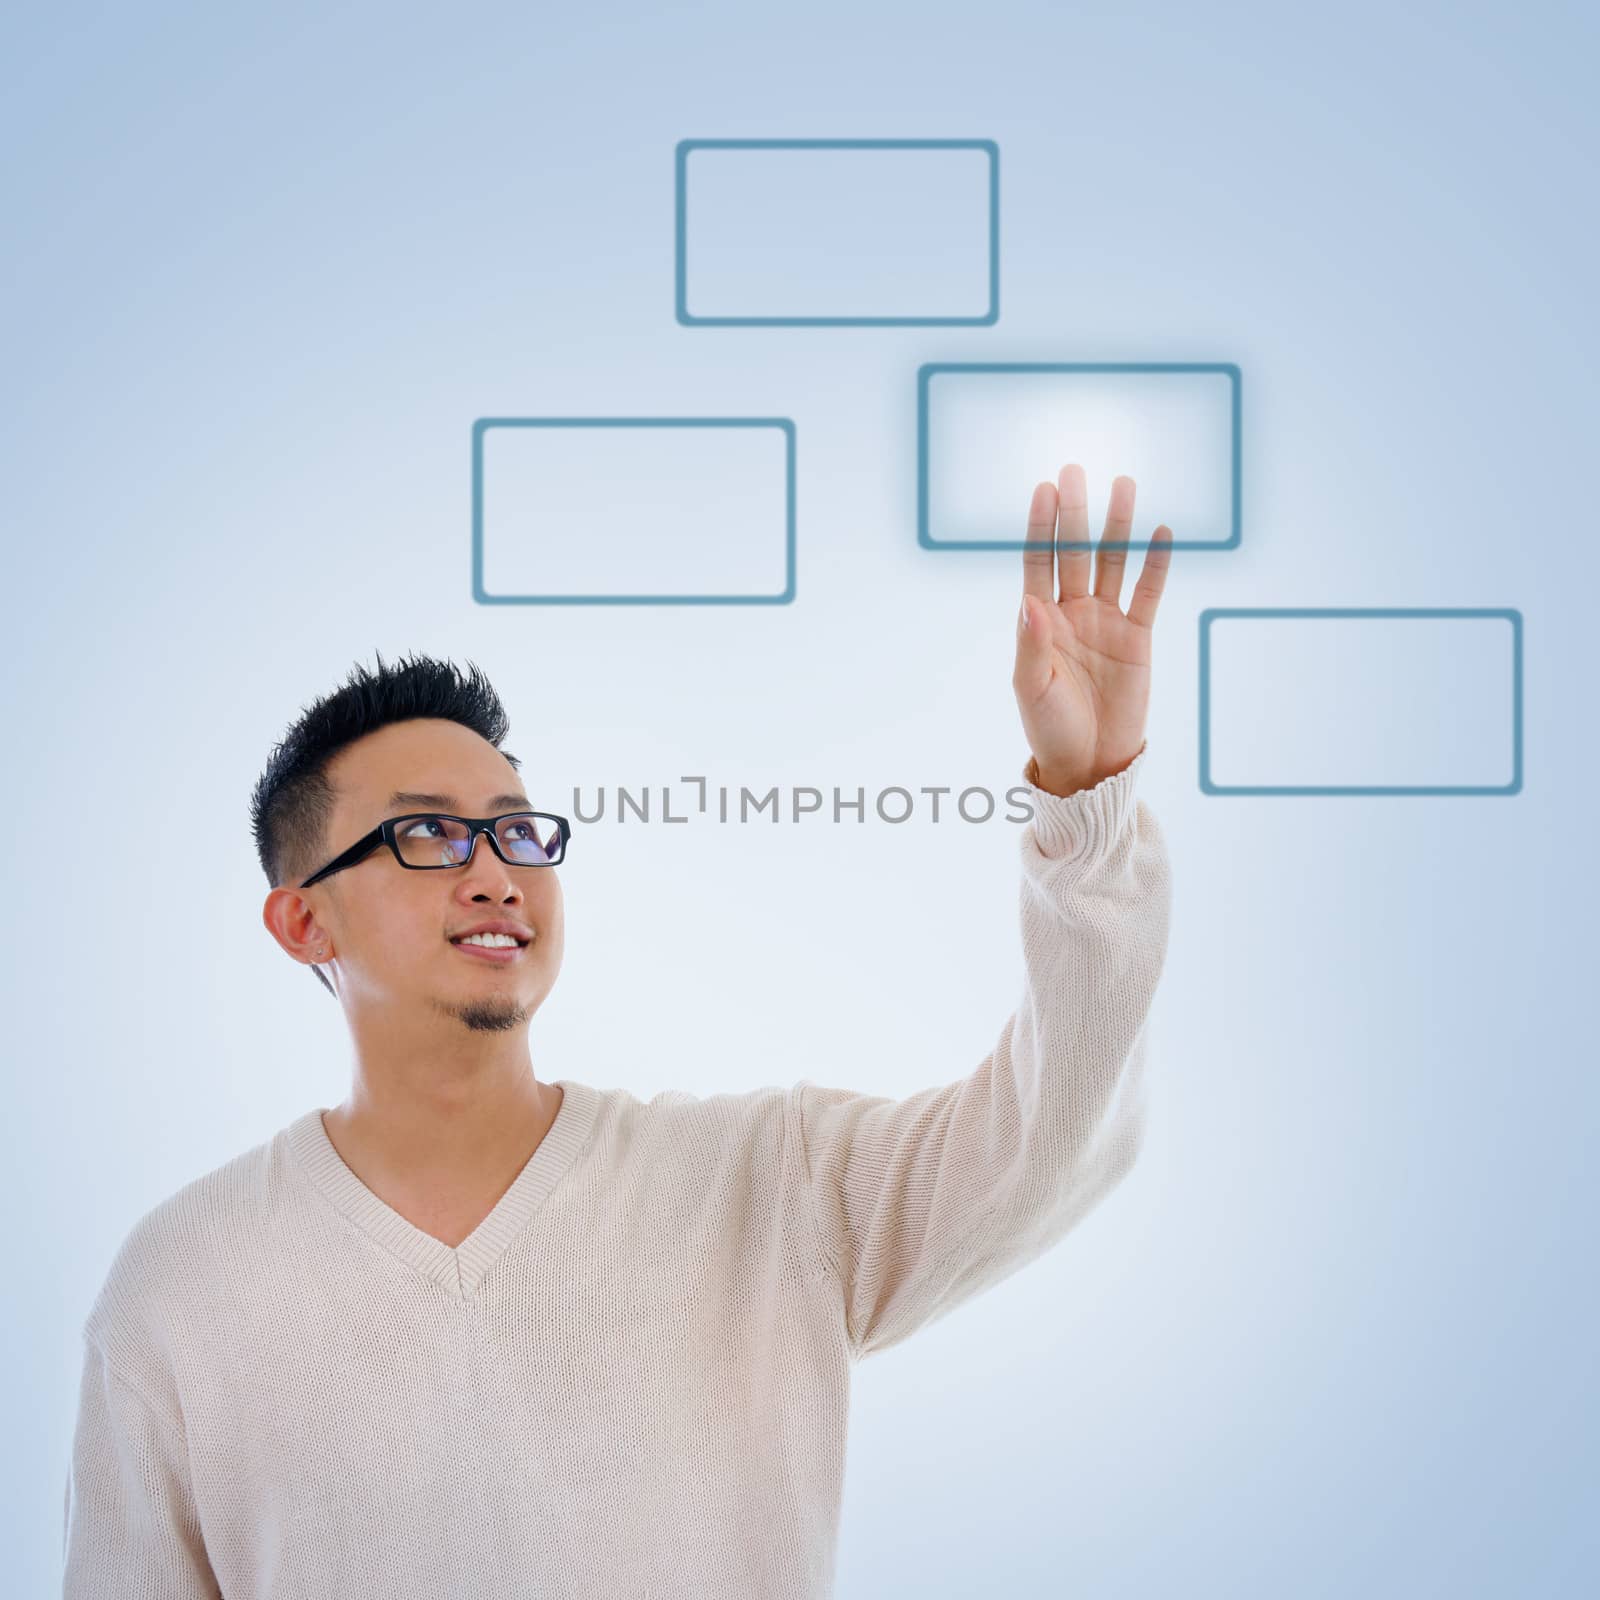 Asian man finger pressing on touch screen monitor button, isolated on blue background. Asian male model.